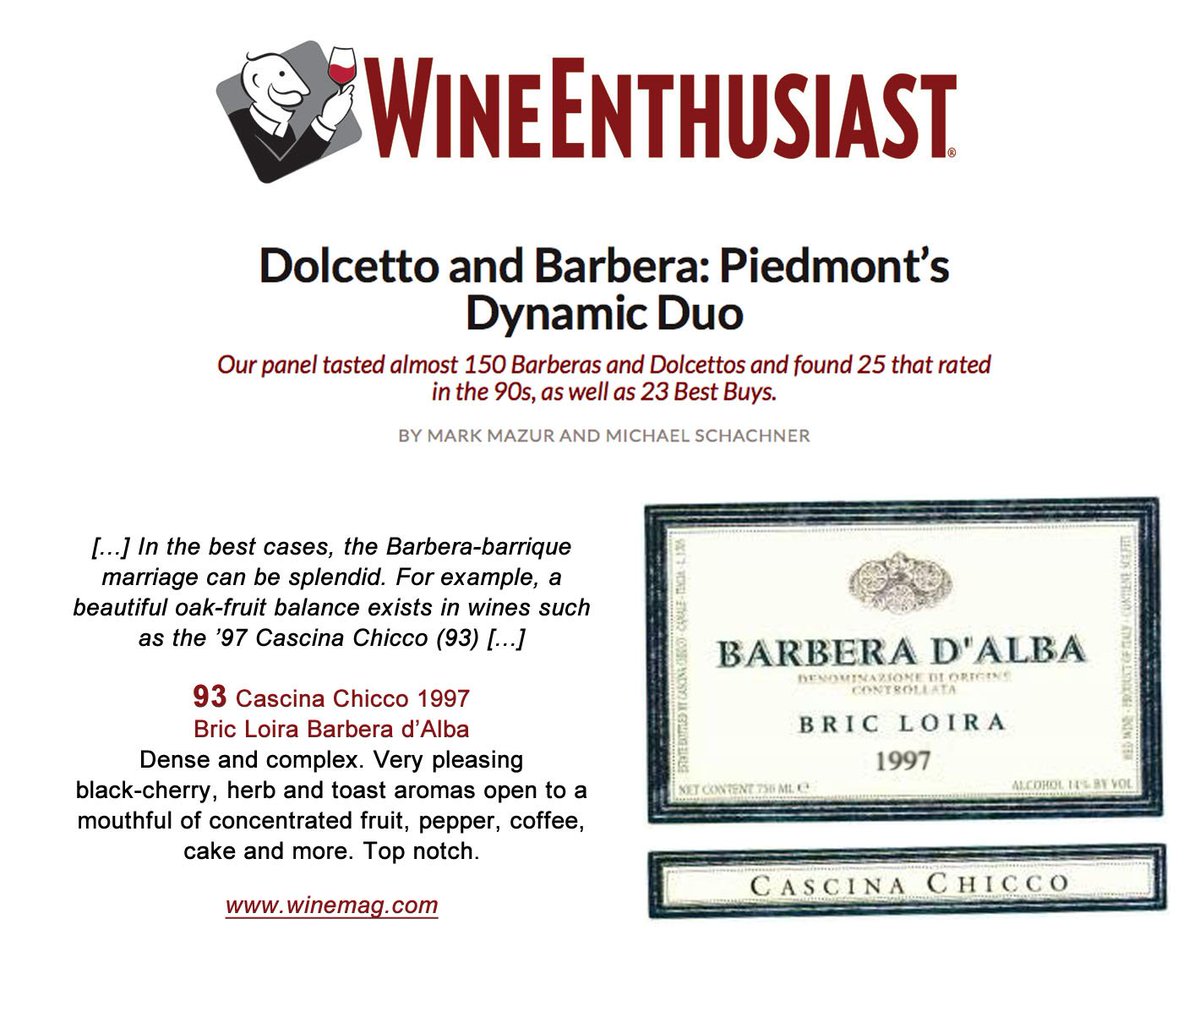 Look what we found: a #Barbera #BricLoira '97 great rating from @WineEnthusiast. Happy #winewednesday wine lovers!